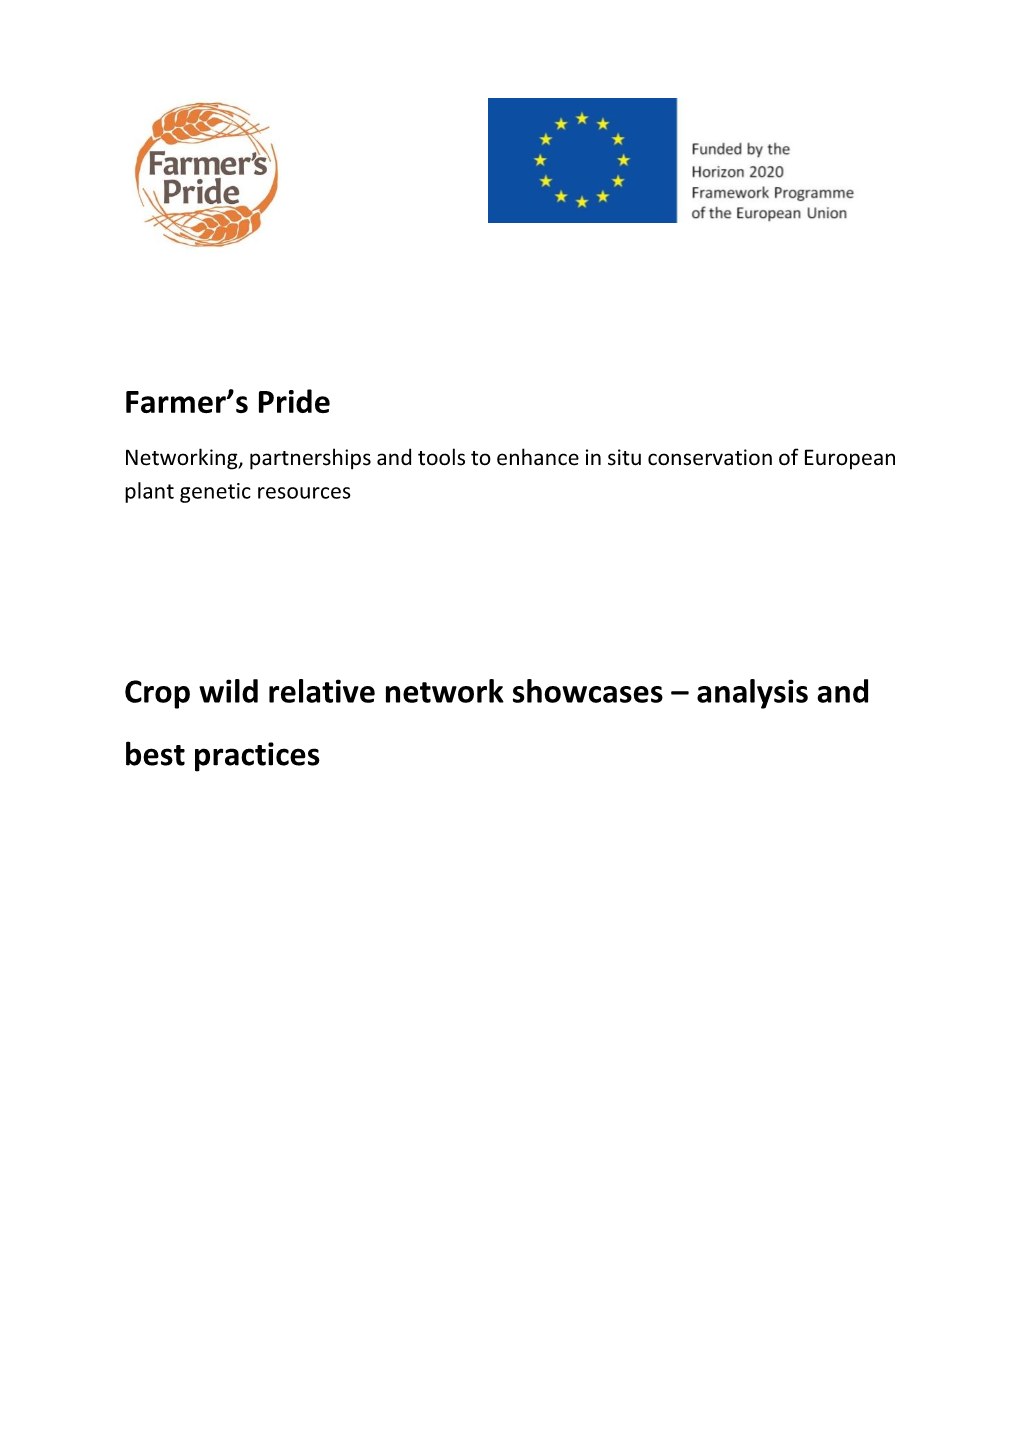 Crop Wild Relative Network Showcases – Analysis and Best Practices